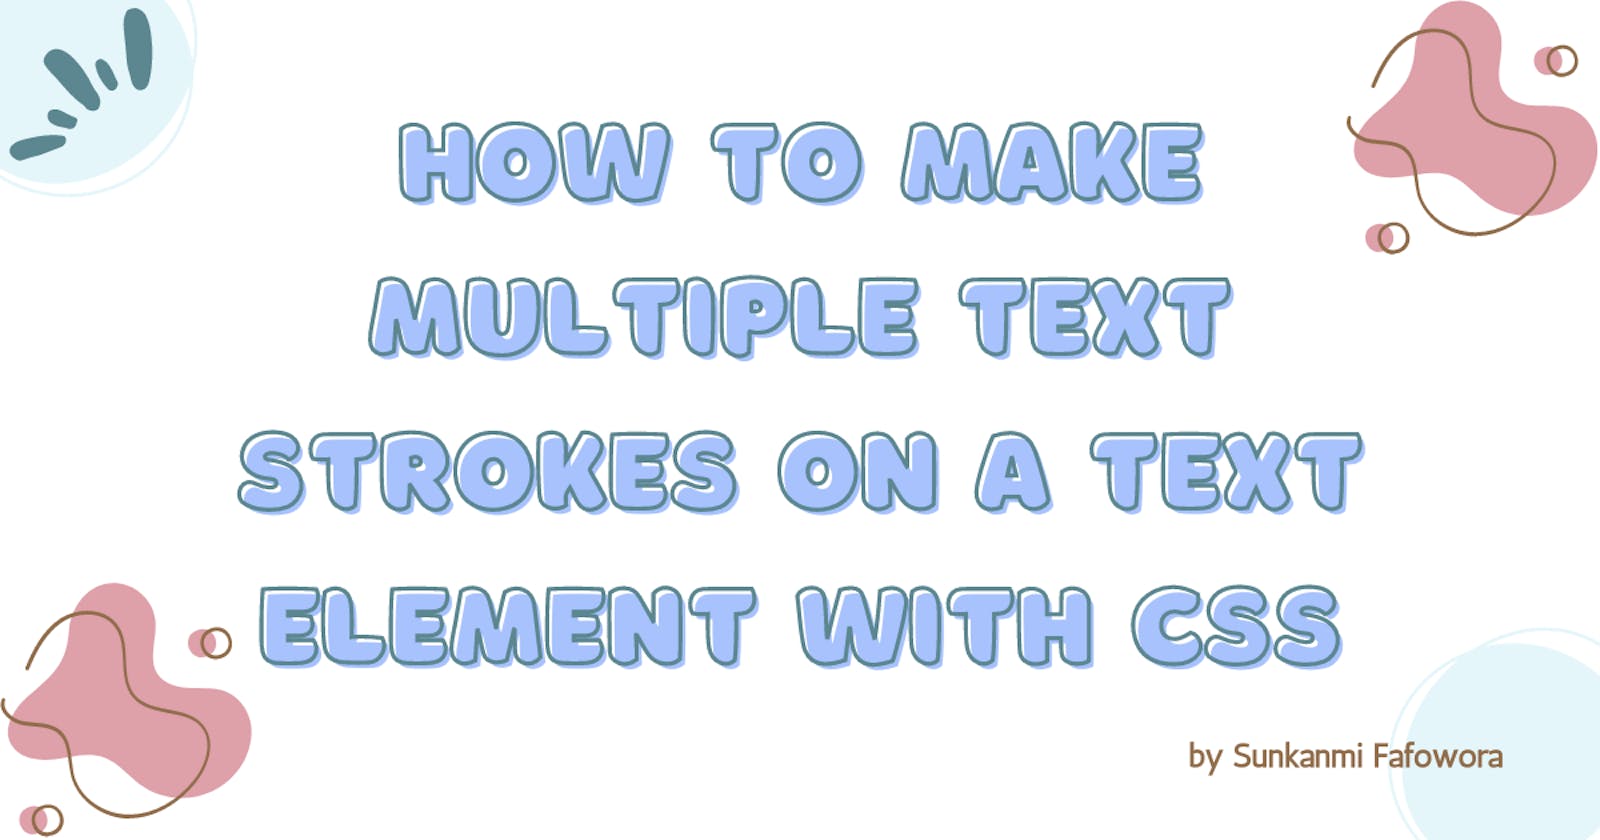 How to make Multiple Text Strokes on a Text Element with CSS